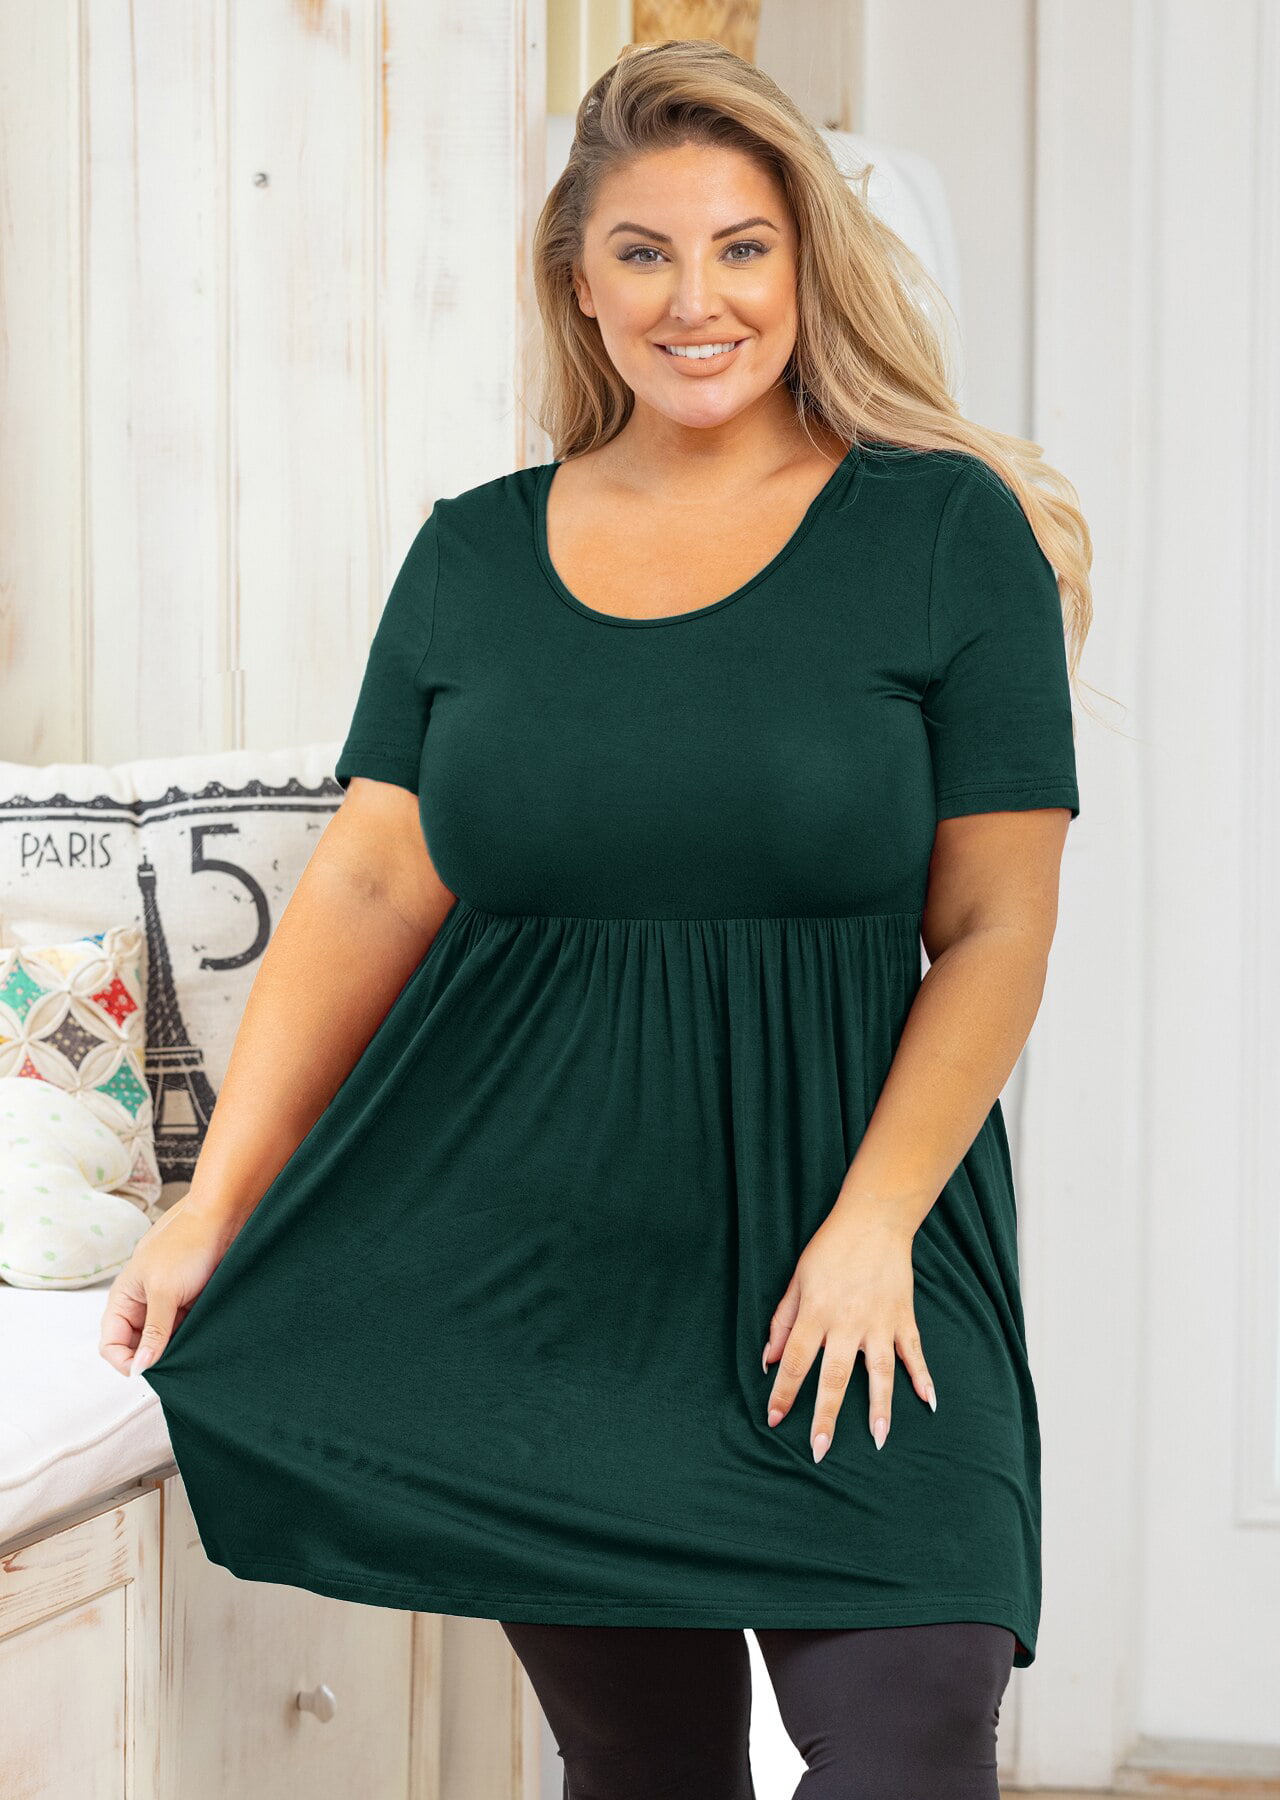 SHOWMALL Women Plus Size Shirt Babydoll Tops Cashew Blue 5X Scoop Neck  Summer Maternity Short Sleeve Tunic Tee Clothing for Leggings